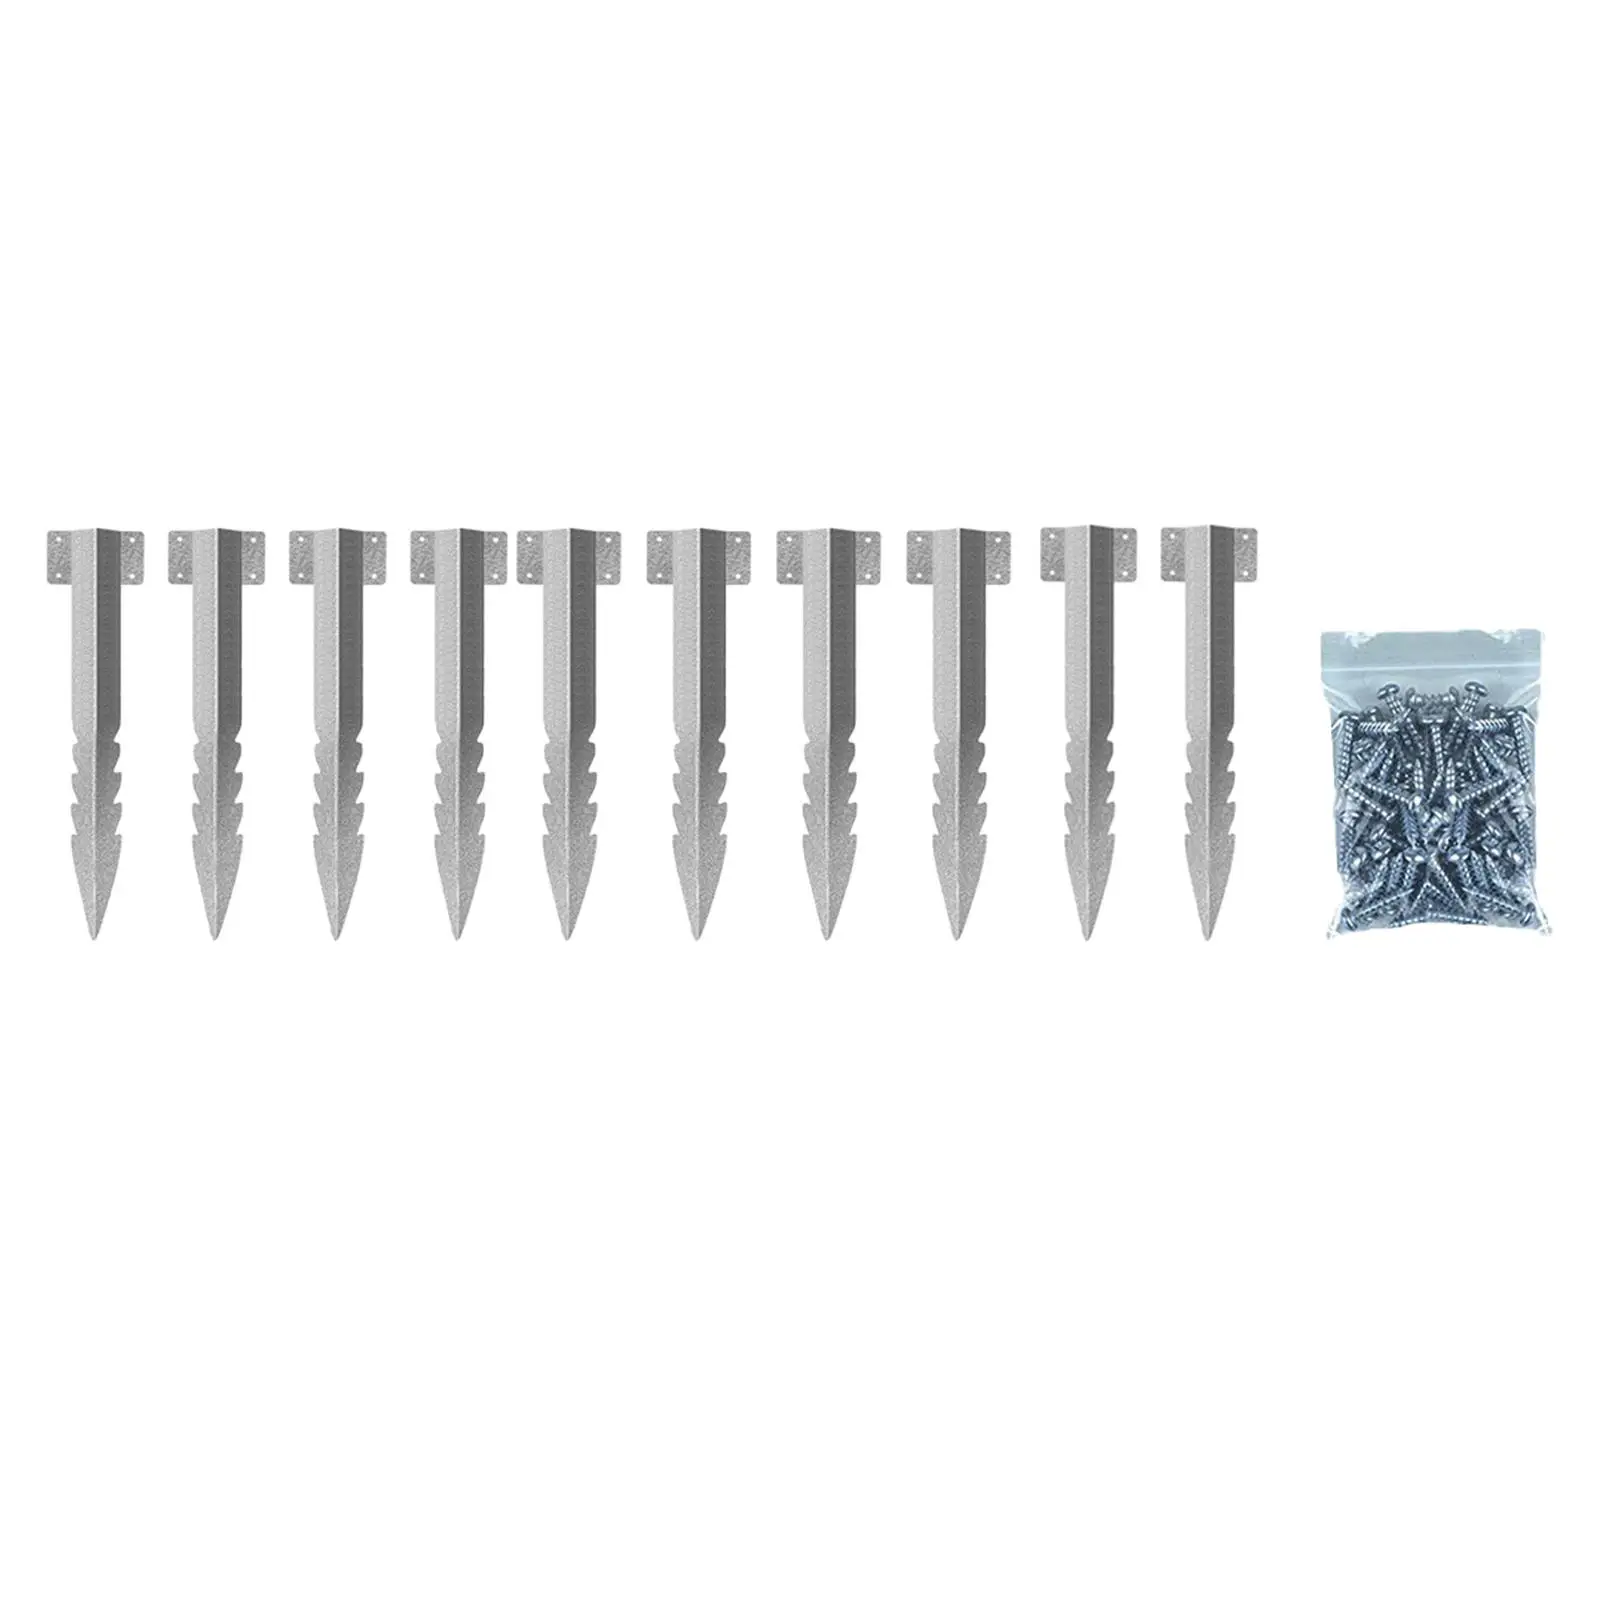 

10 Pieces Fence Repair Kits Duable Heavy Duty Steel Fence Post Anchor Ground Stake Railway Sleepers Brackets Decking Base Frame